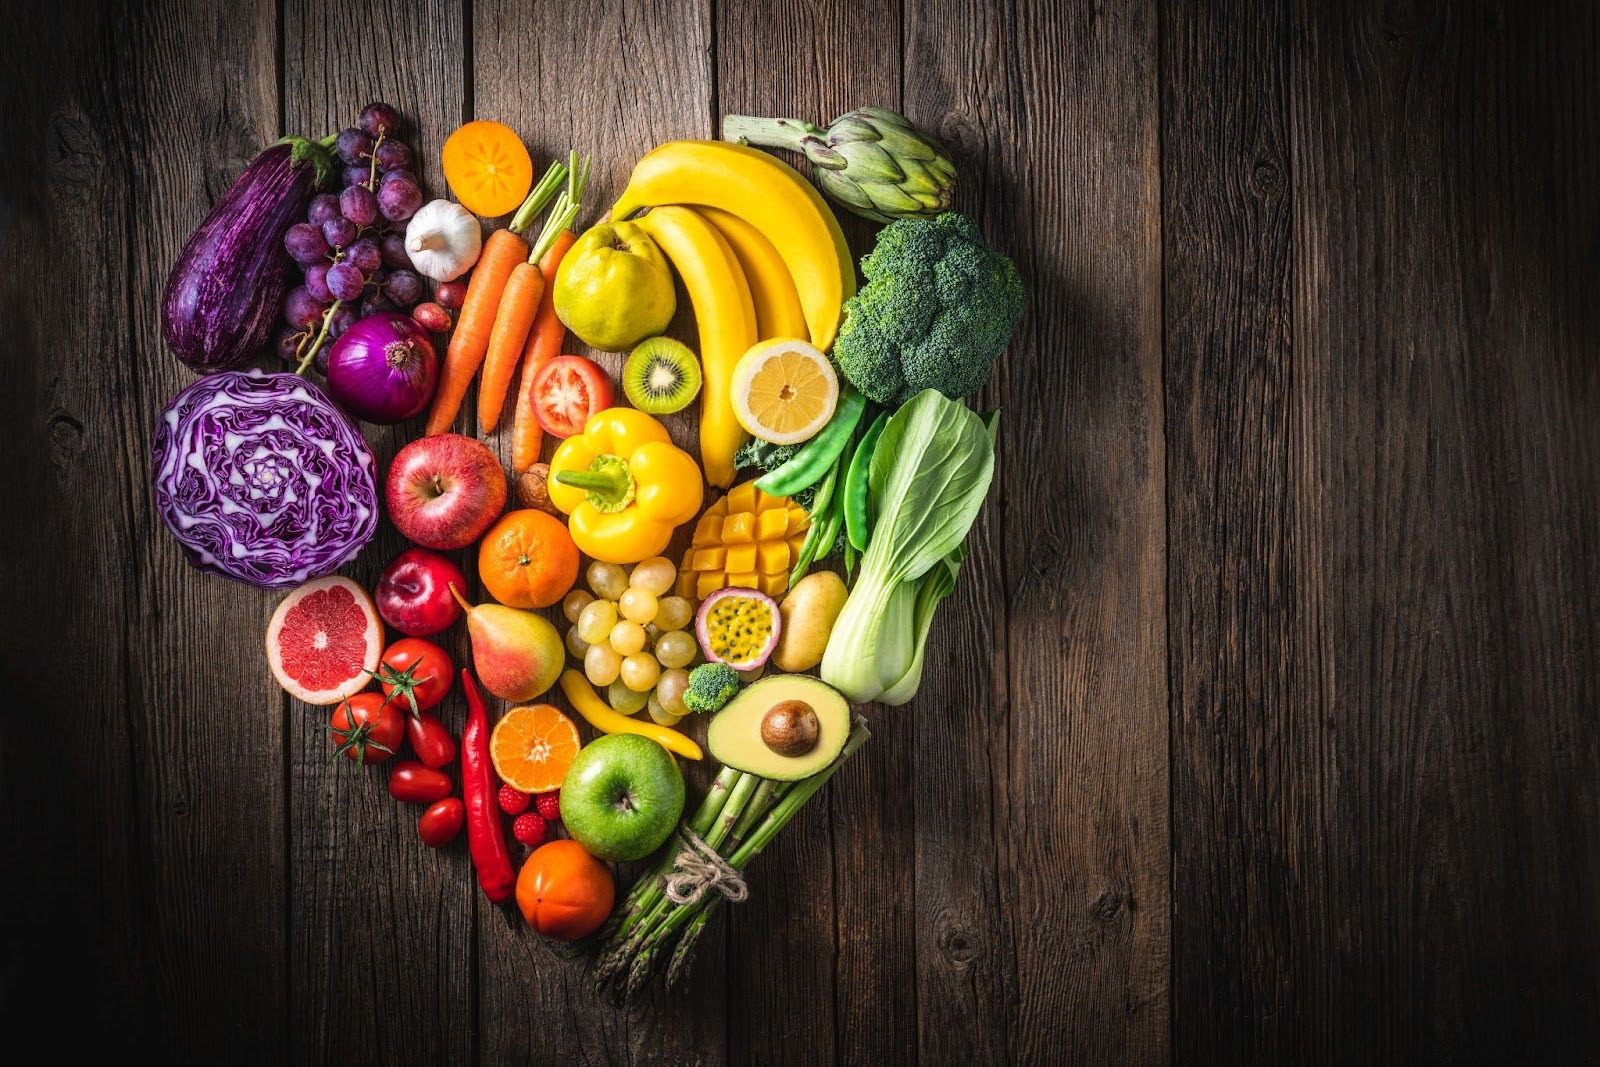 fruits and veggies in shape of heart